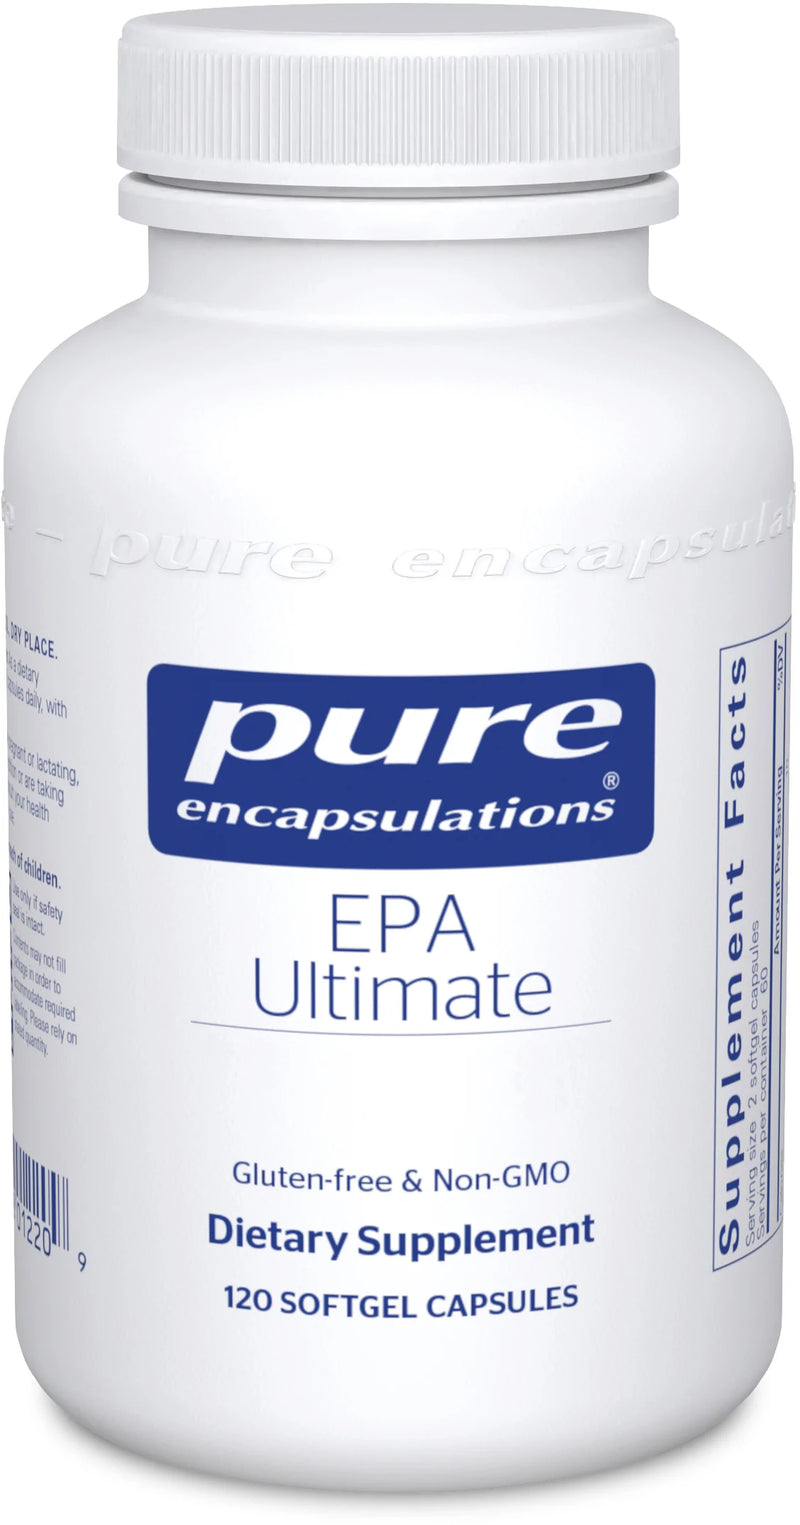 EPA Ultimate by Pure Encapsulations®